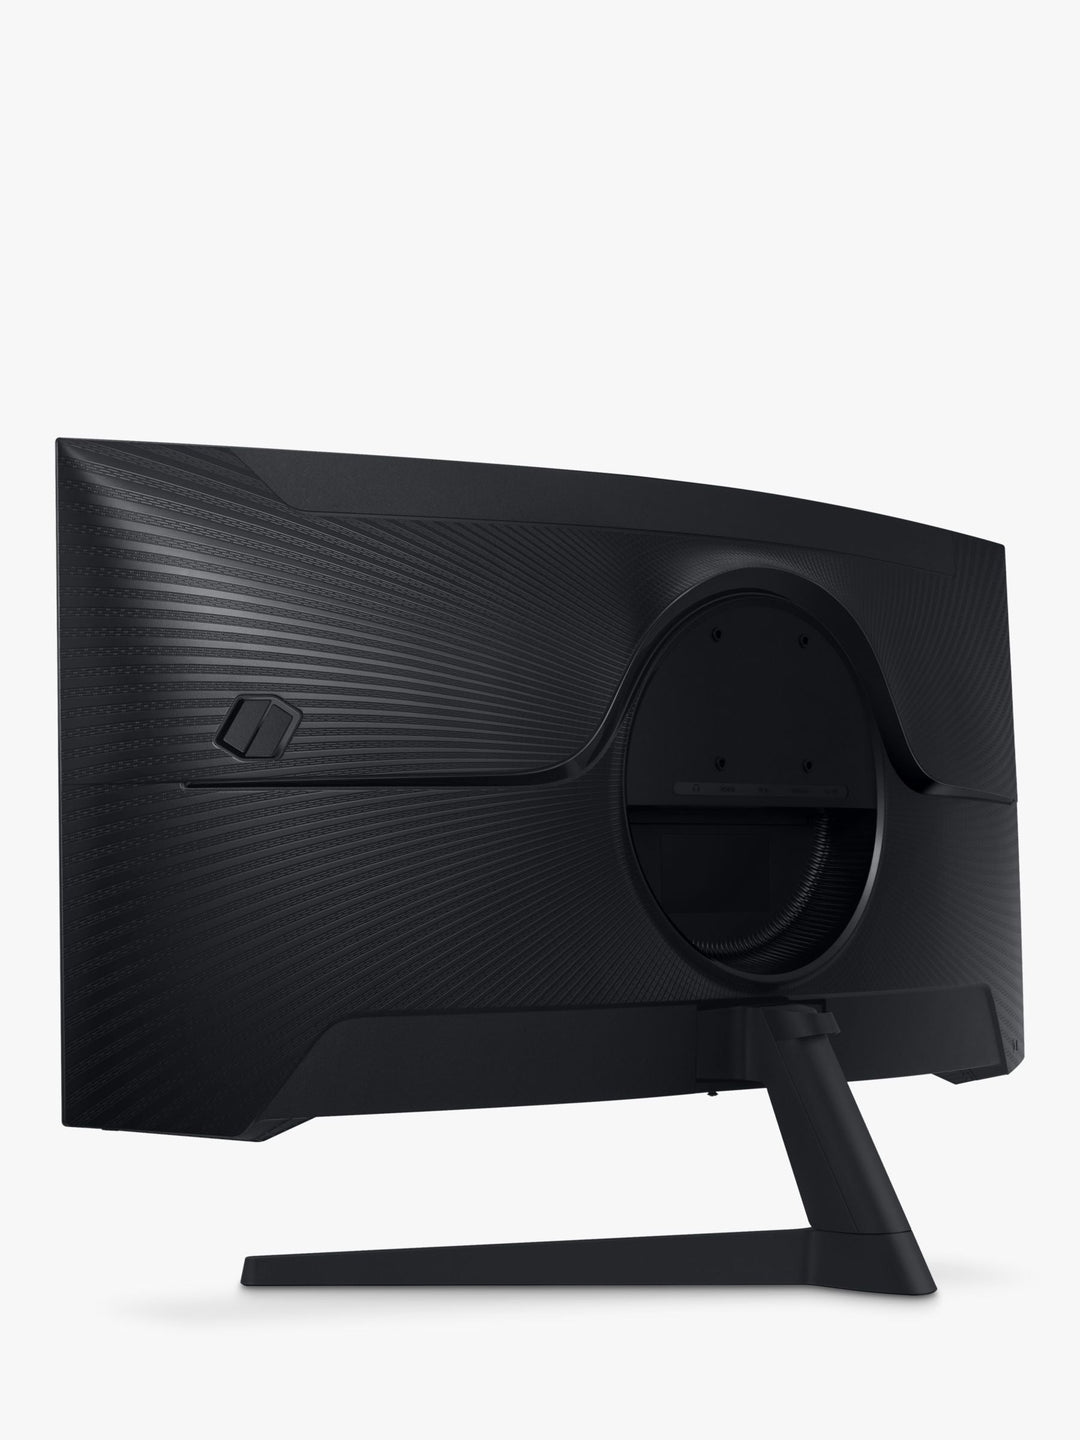 Ultra Wide Quad HD 34" Curved Gaming Monitor, 165Hz Refresh Rate, 1ms Response Time, AMD Freesync Premium, HDMI 2.0